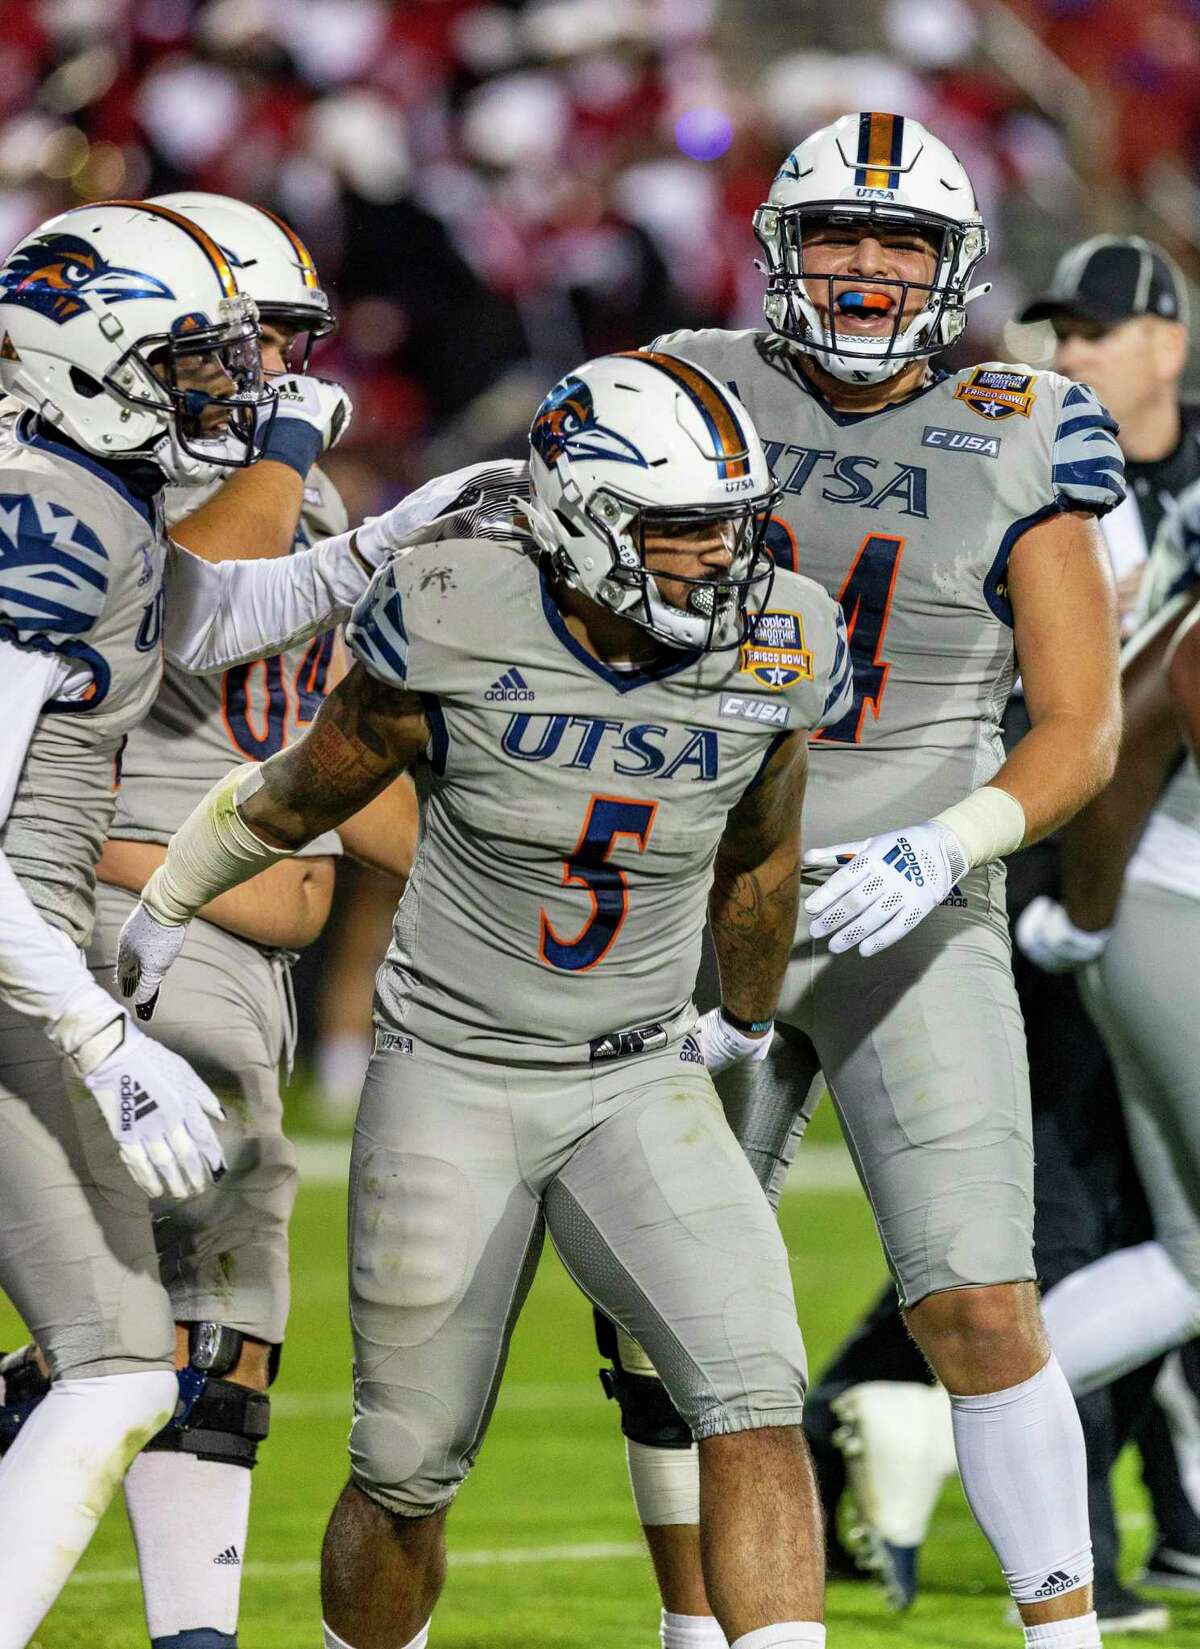 UTSA?•s Roadrunners running back Brenden Brady celebrates Tuesday, Dec. 21, 2021 during the first half of the Tropical Smoothie Cafe Frisco Bowl in Frisco, Texas after scoring UTSA?•s second touchdown.